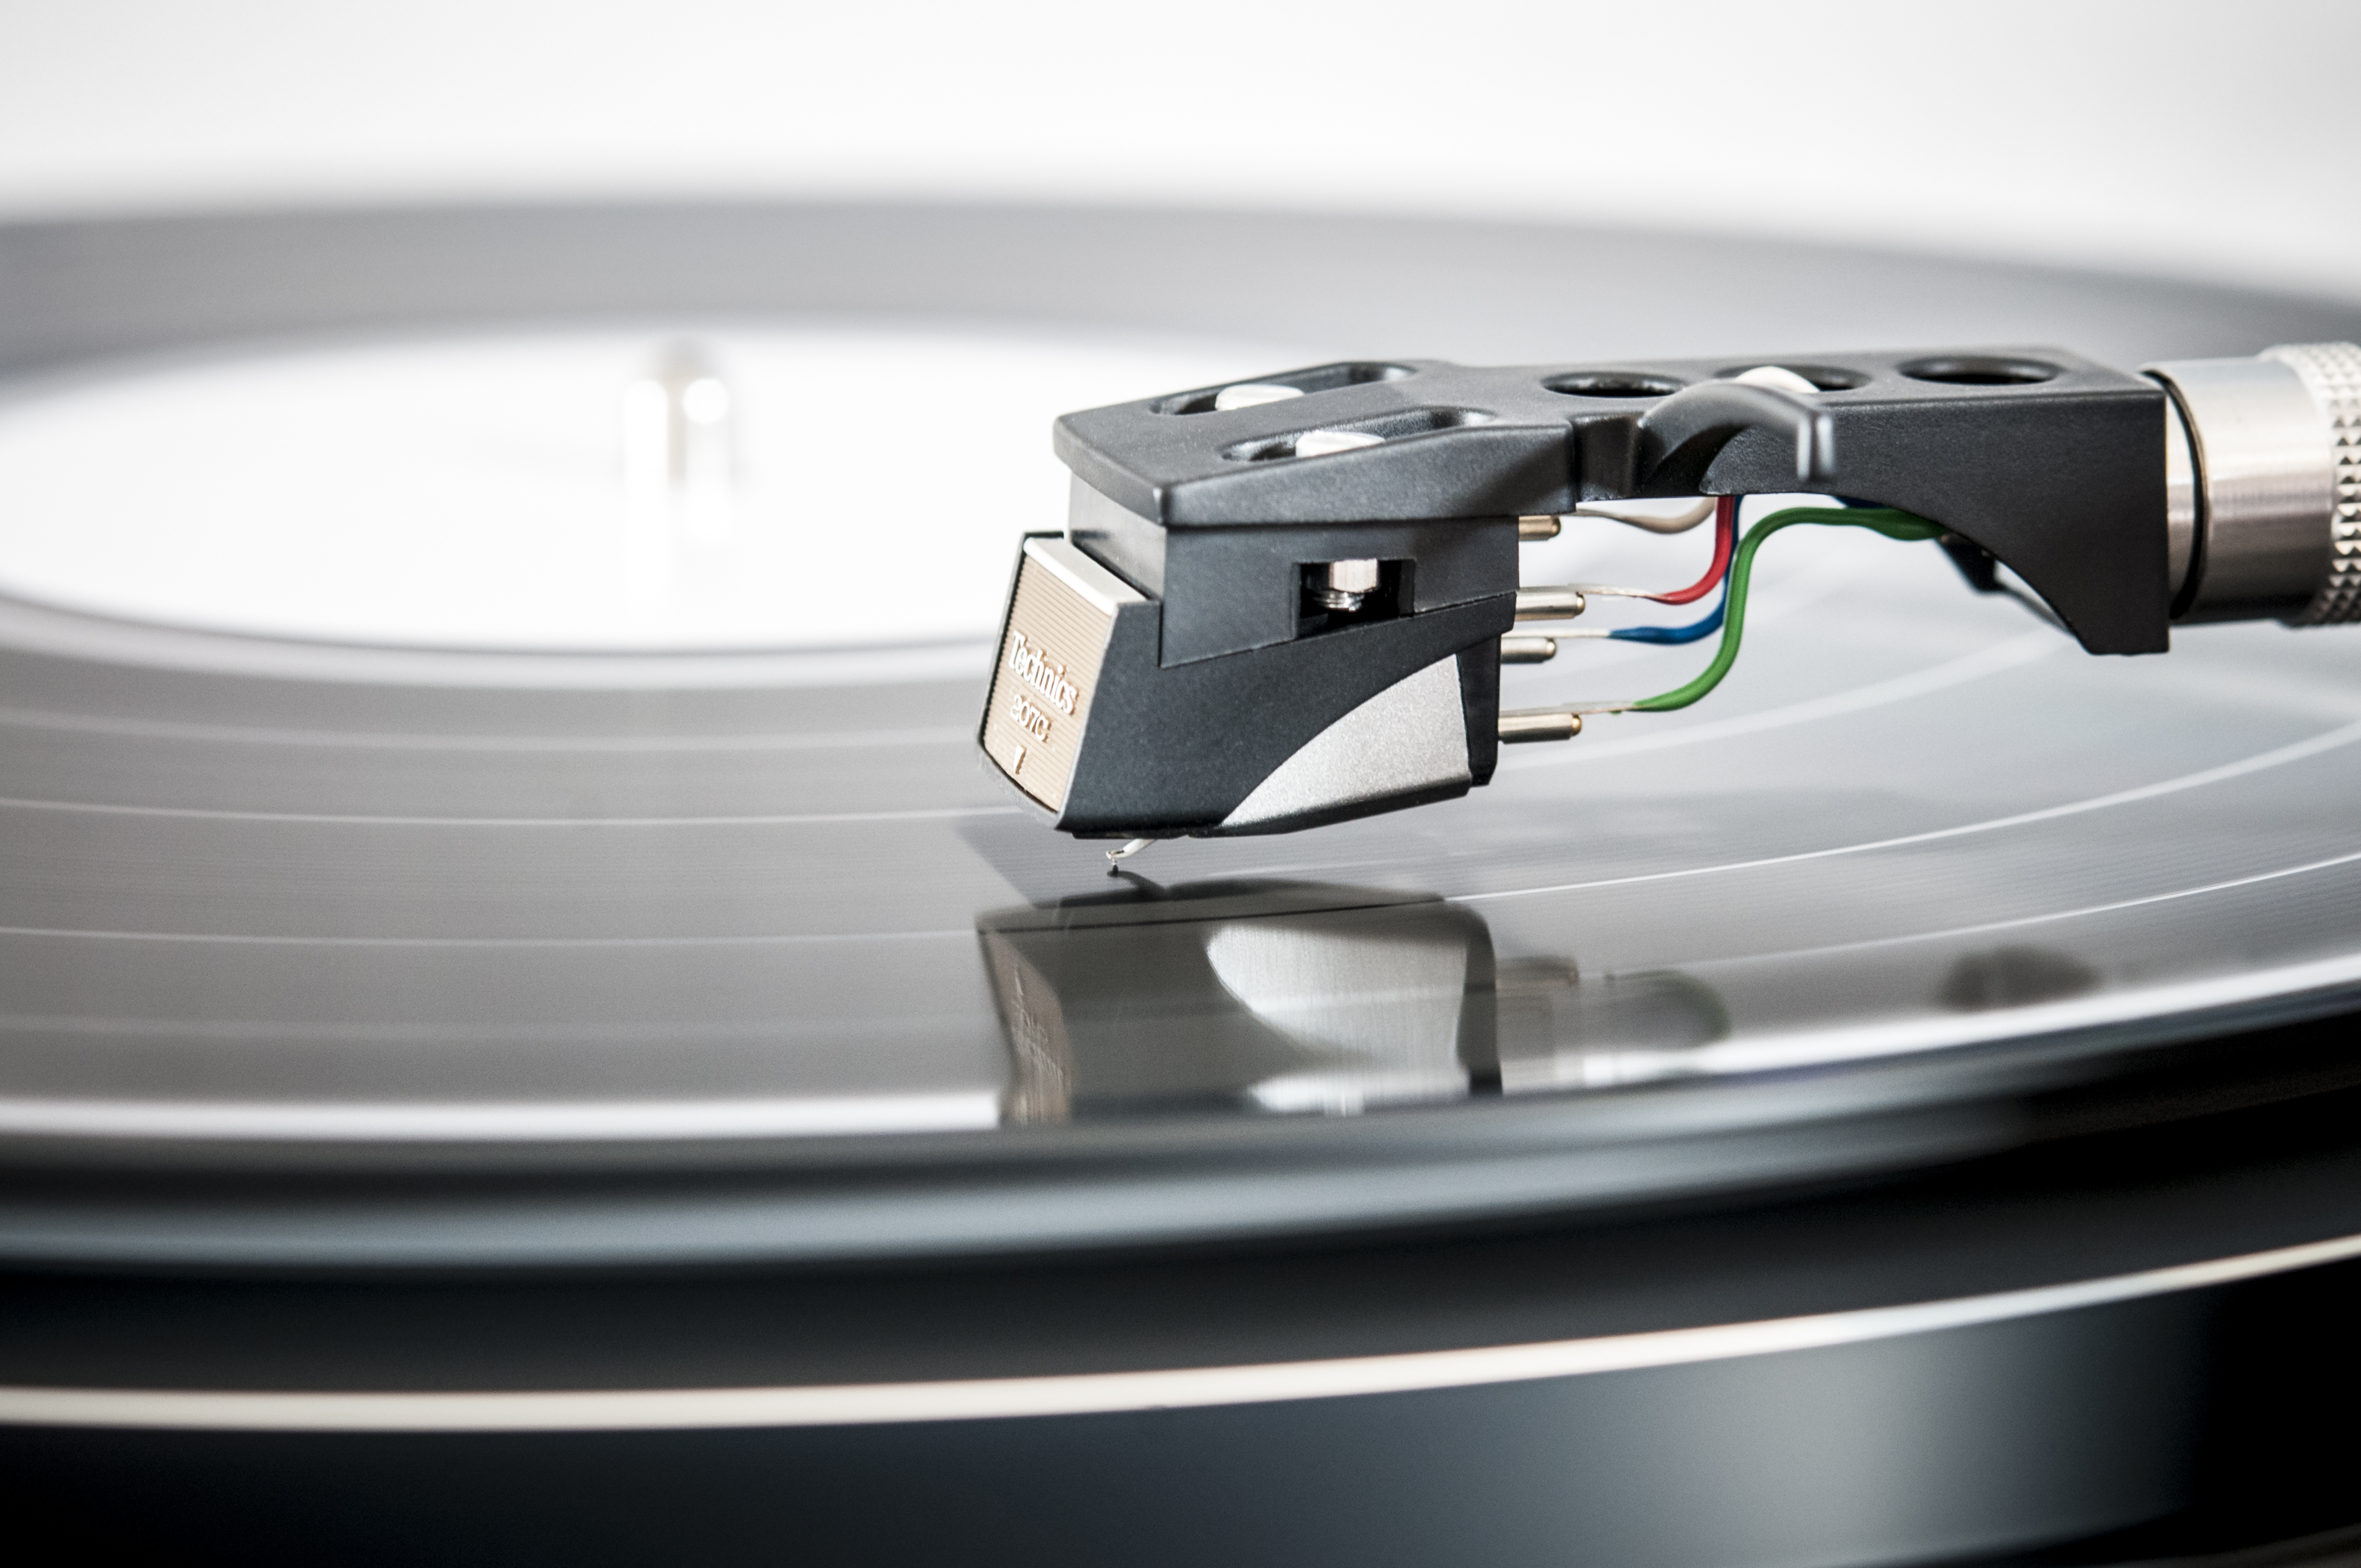 Vinyl Sales Beat Digital Downloads for the First Time in UK